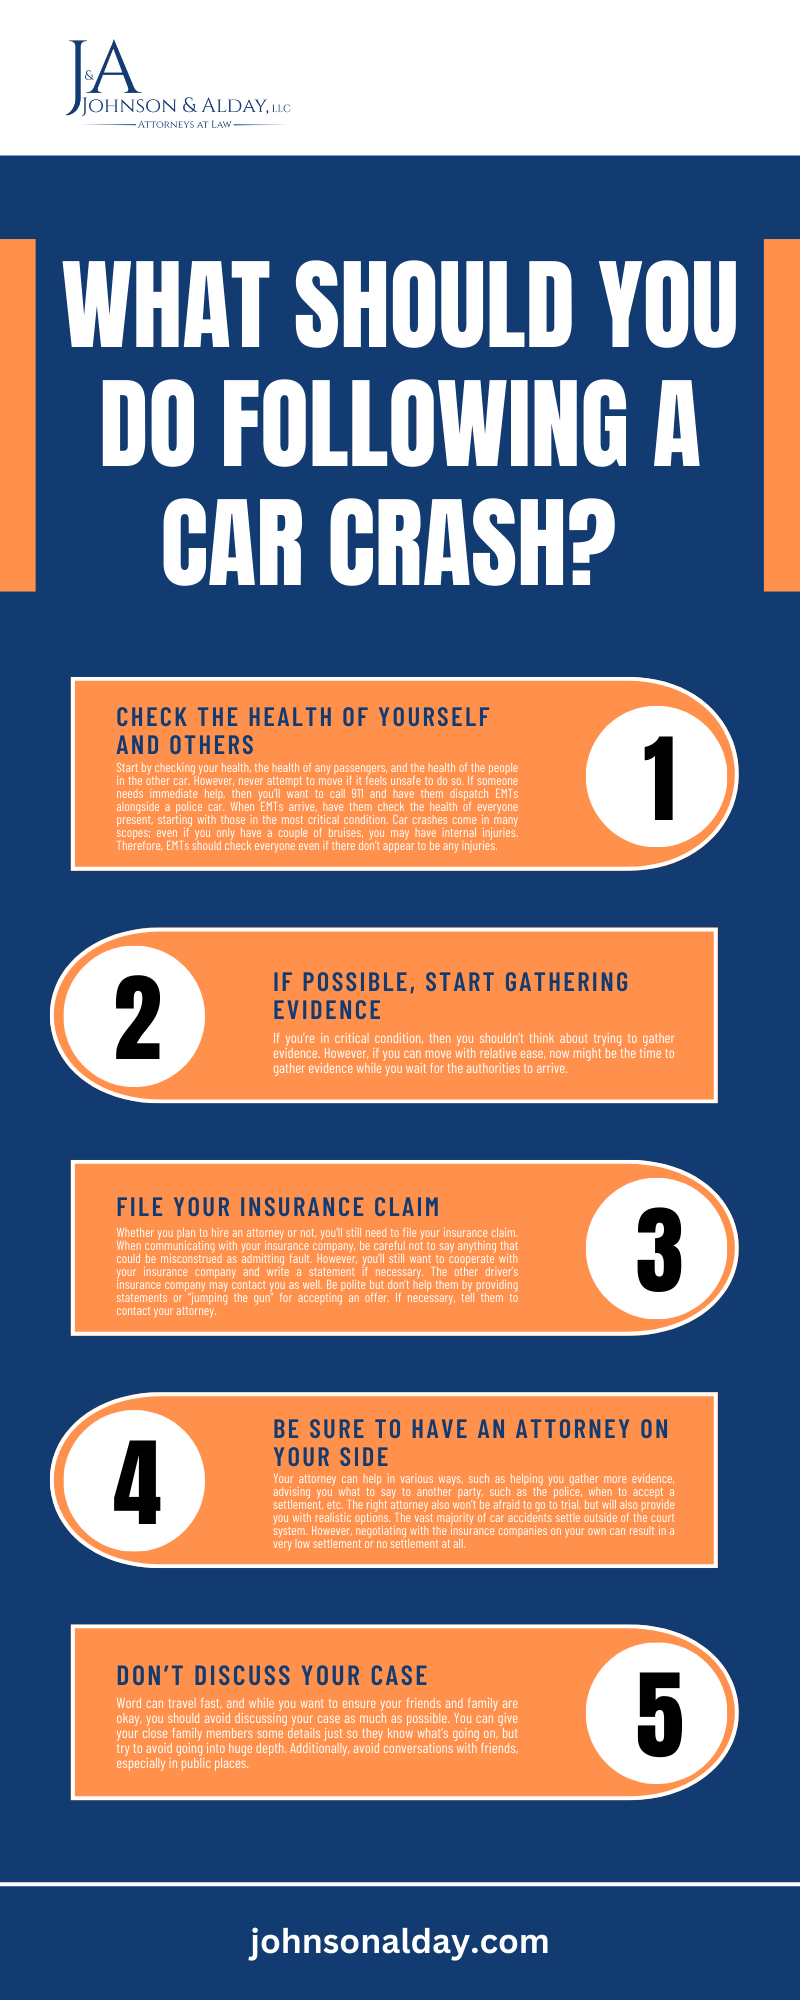 WHAT SHOULD YOU DO FOLLOWING A CAR CRASH INFOGRAPHIC